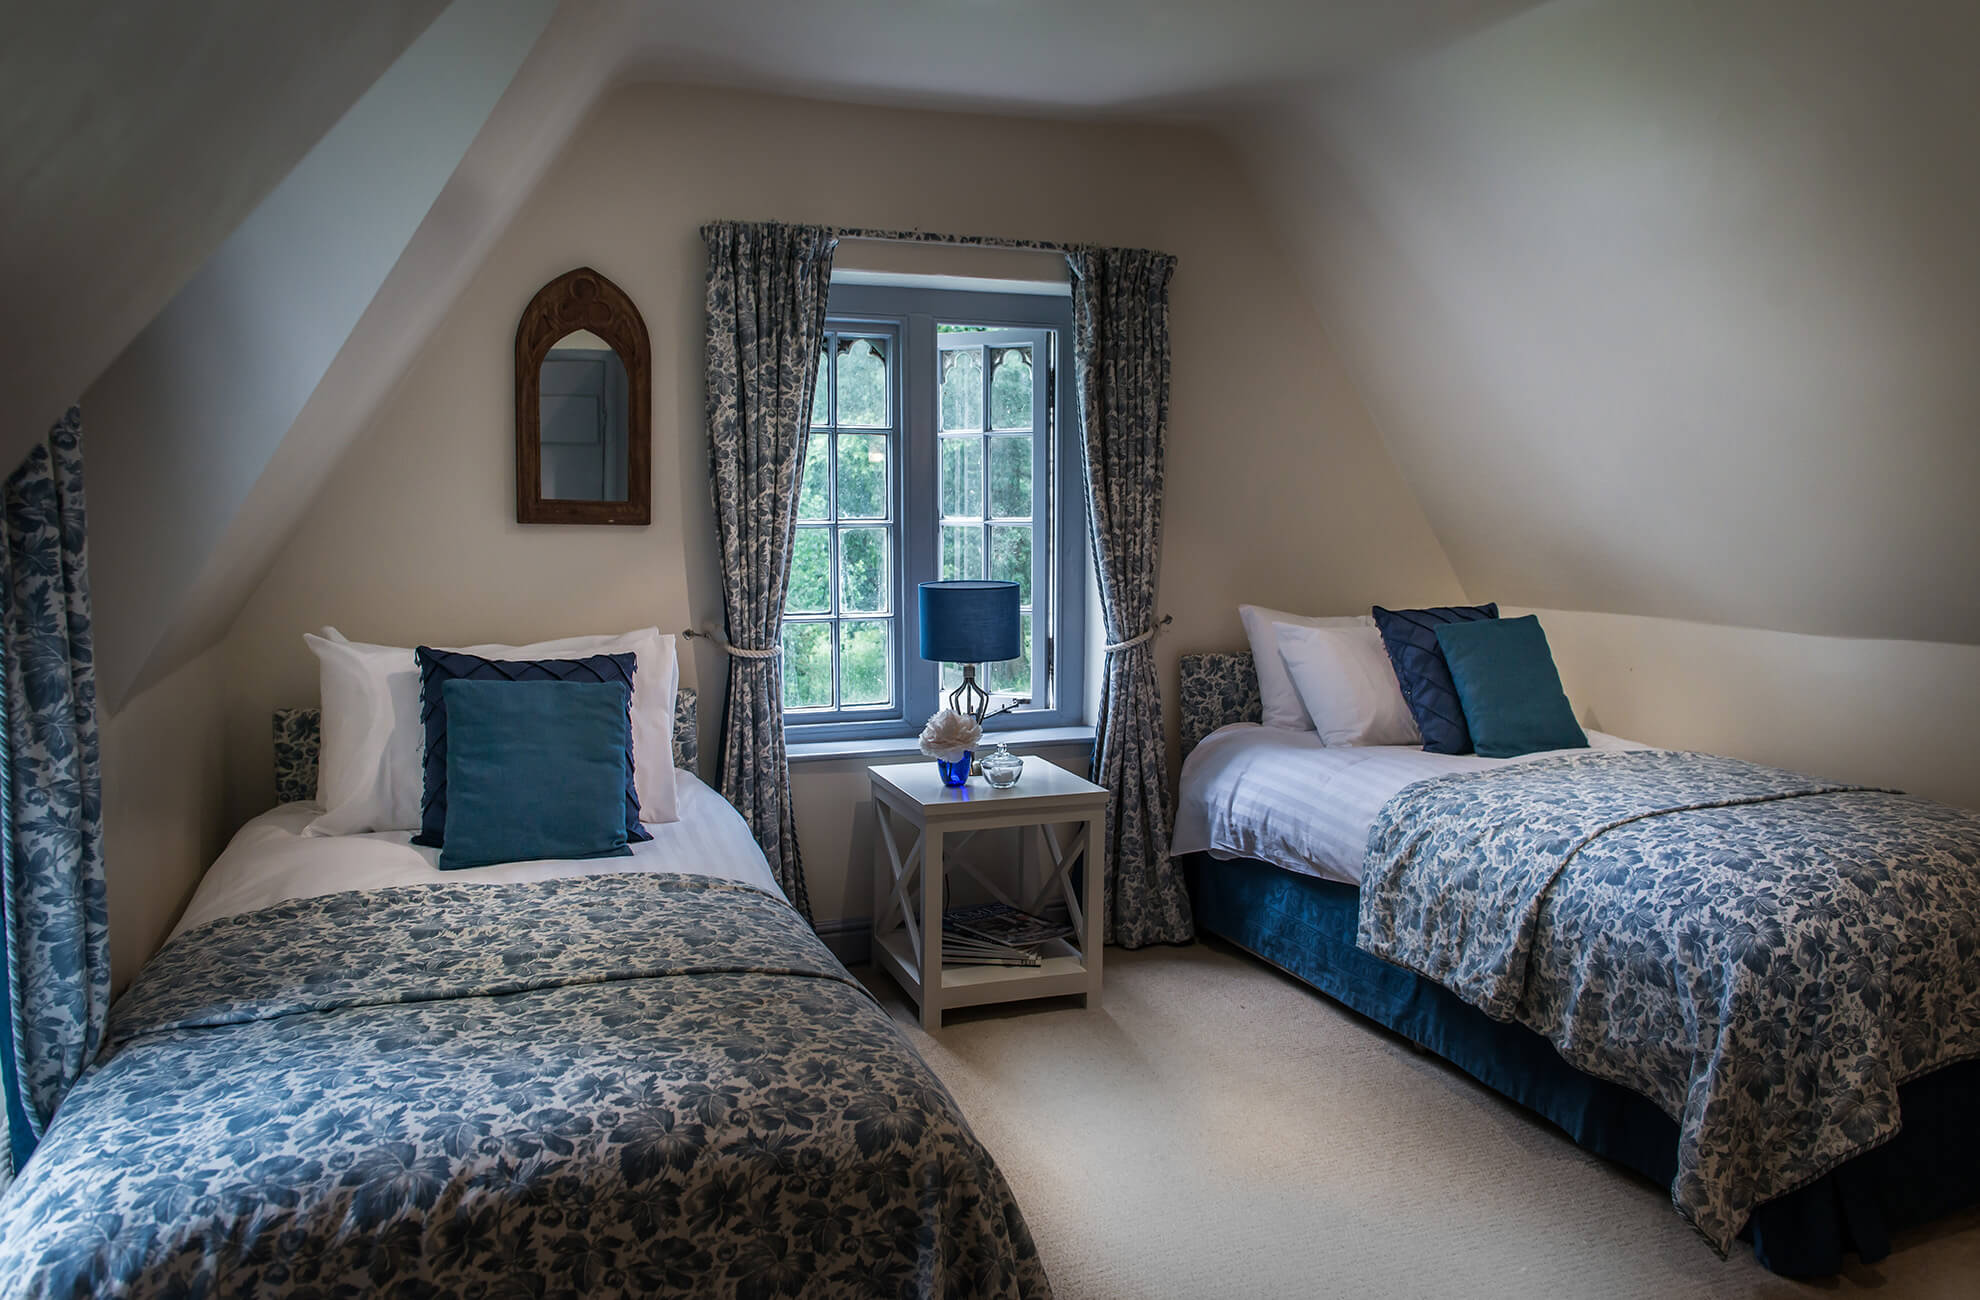 Cottages on site at Combermere Abbey are a perfect option for your wedding guests to stay the night